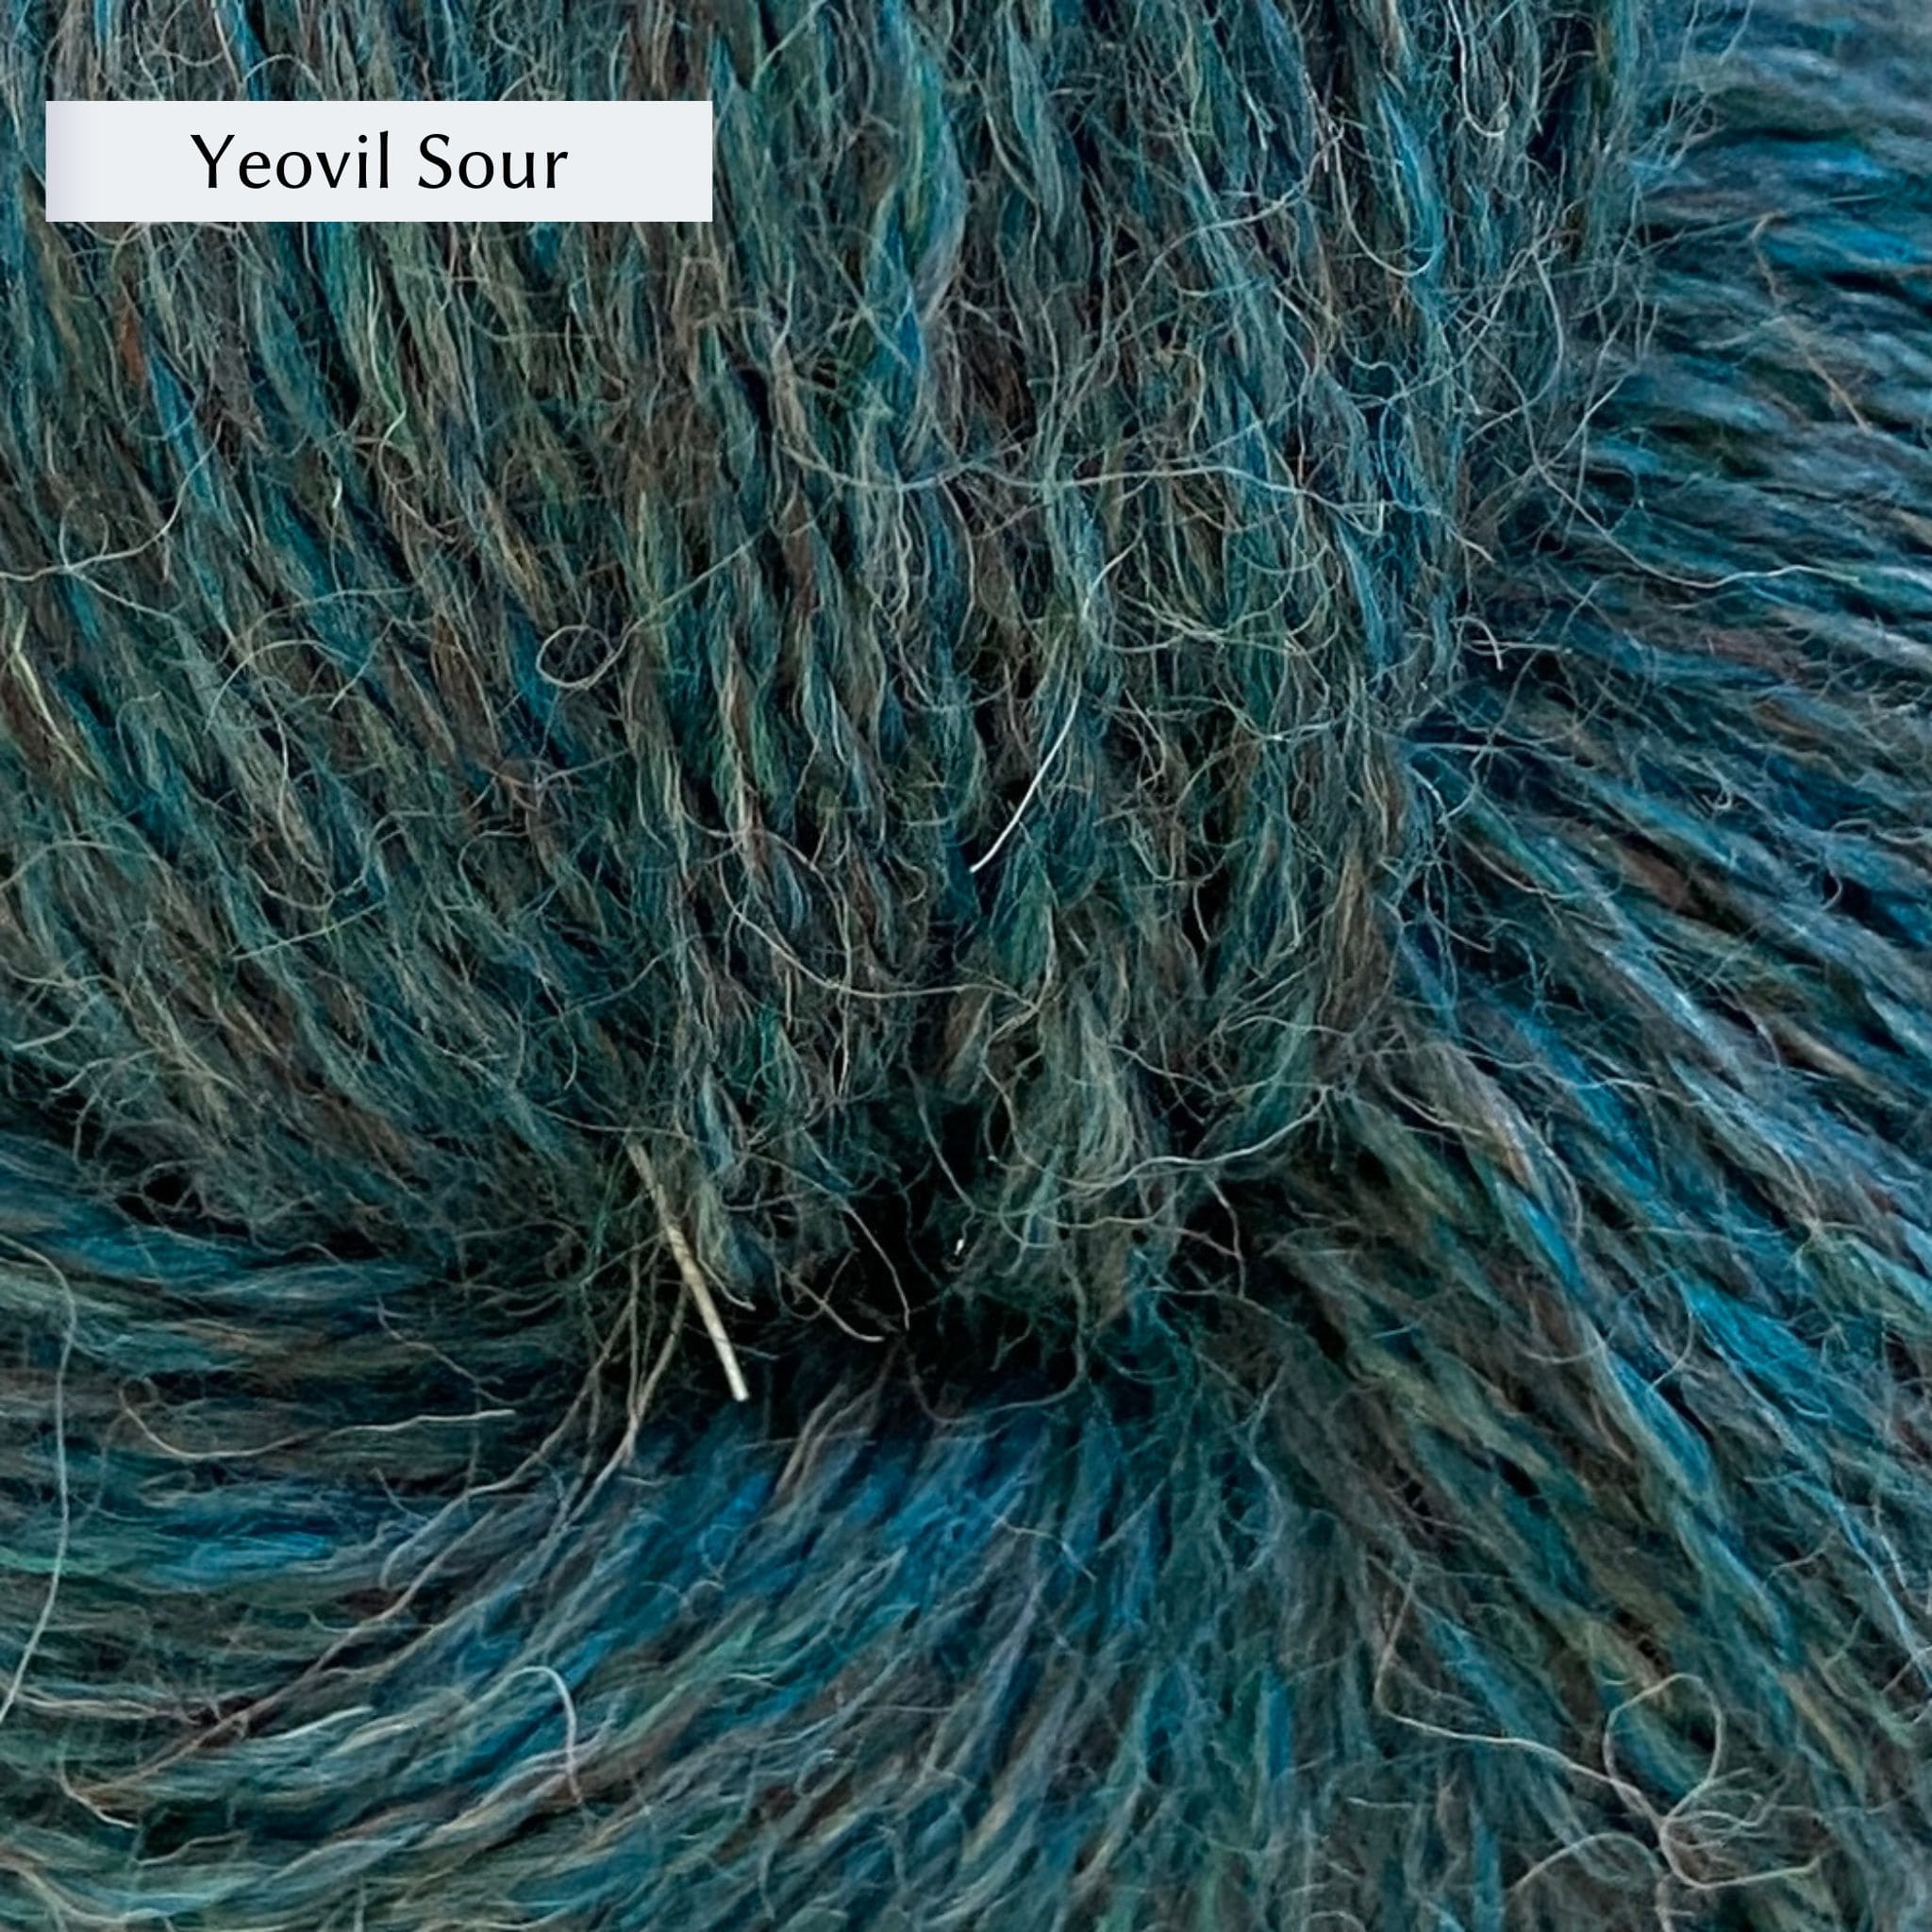 John Arbon Appledore DK, a DK weight British yarn, in color Yeovil Sour, a petrol teal with grey and cream heathering